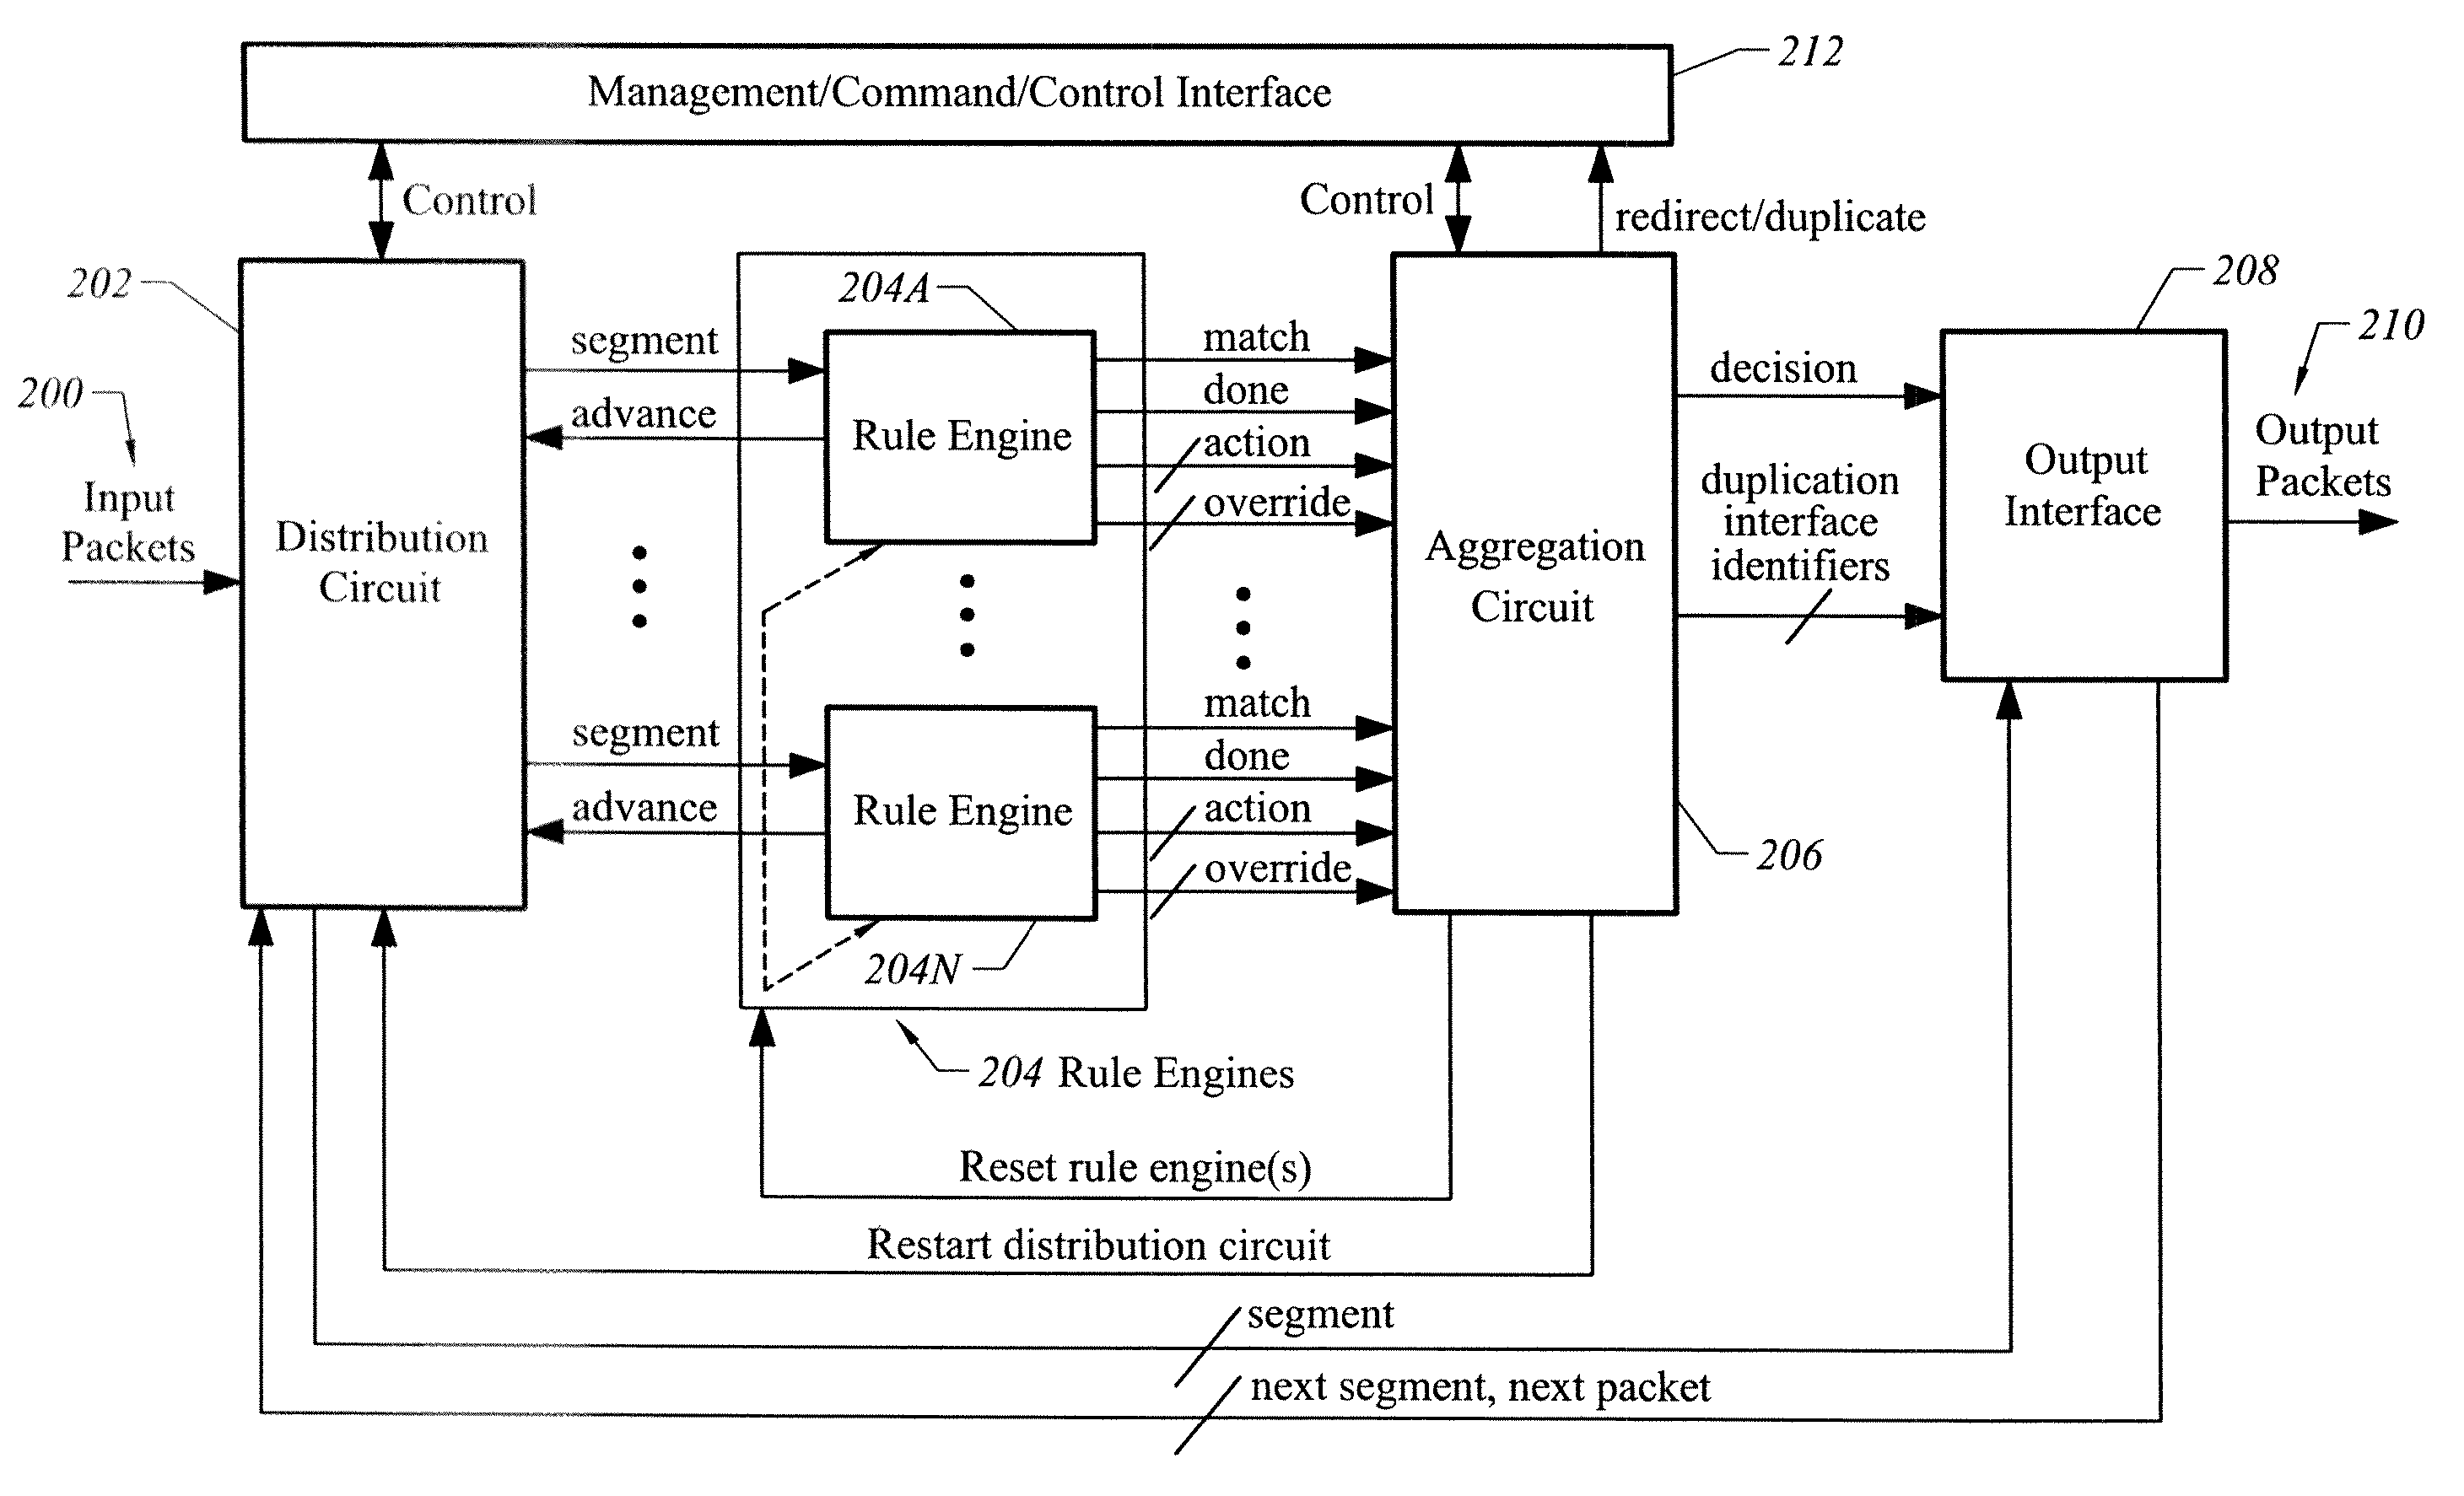 Apparatus and method for providing security and monitoring in a networking architecture